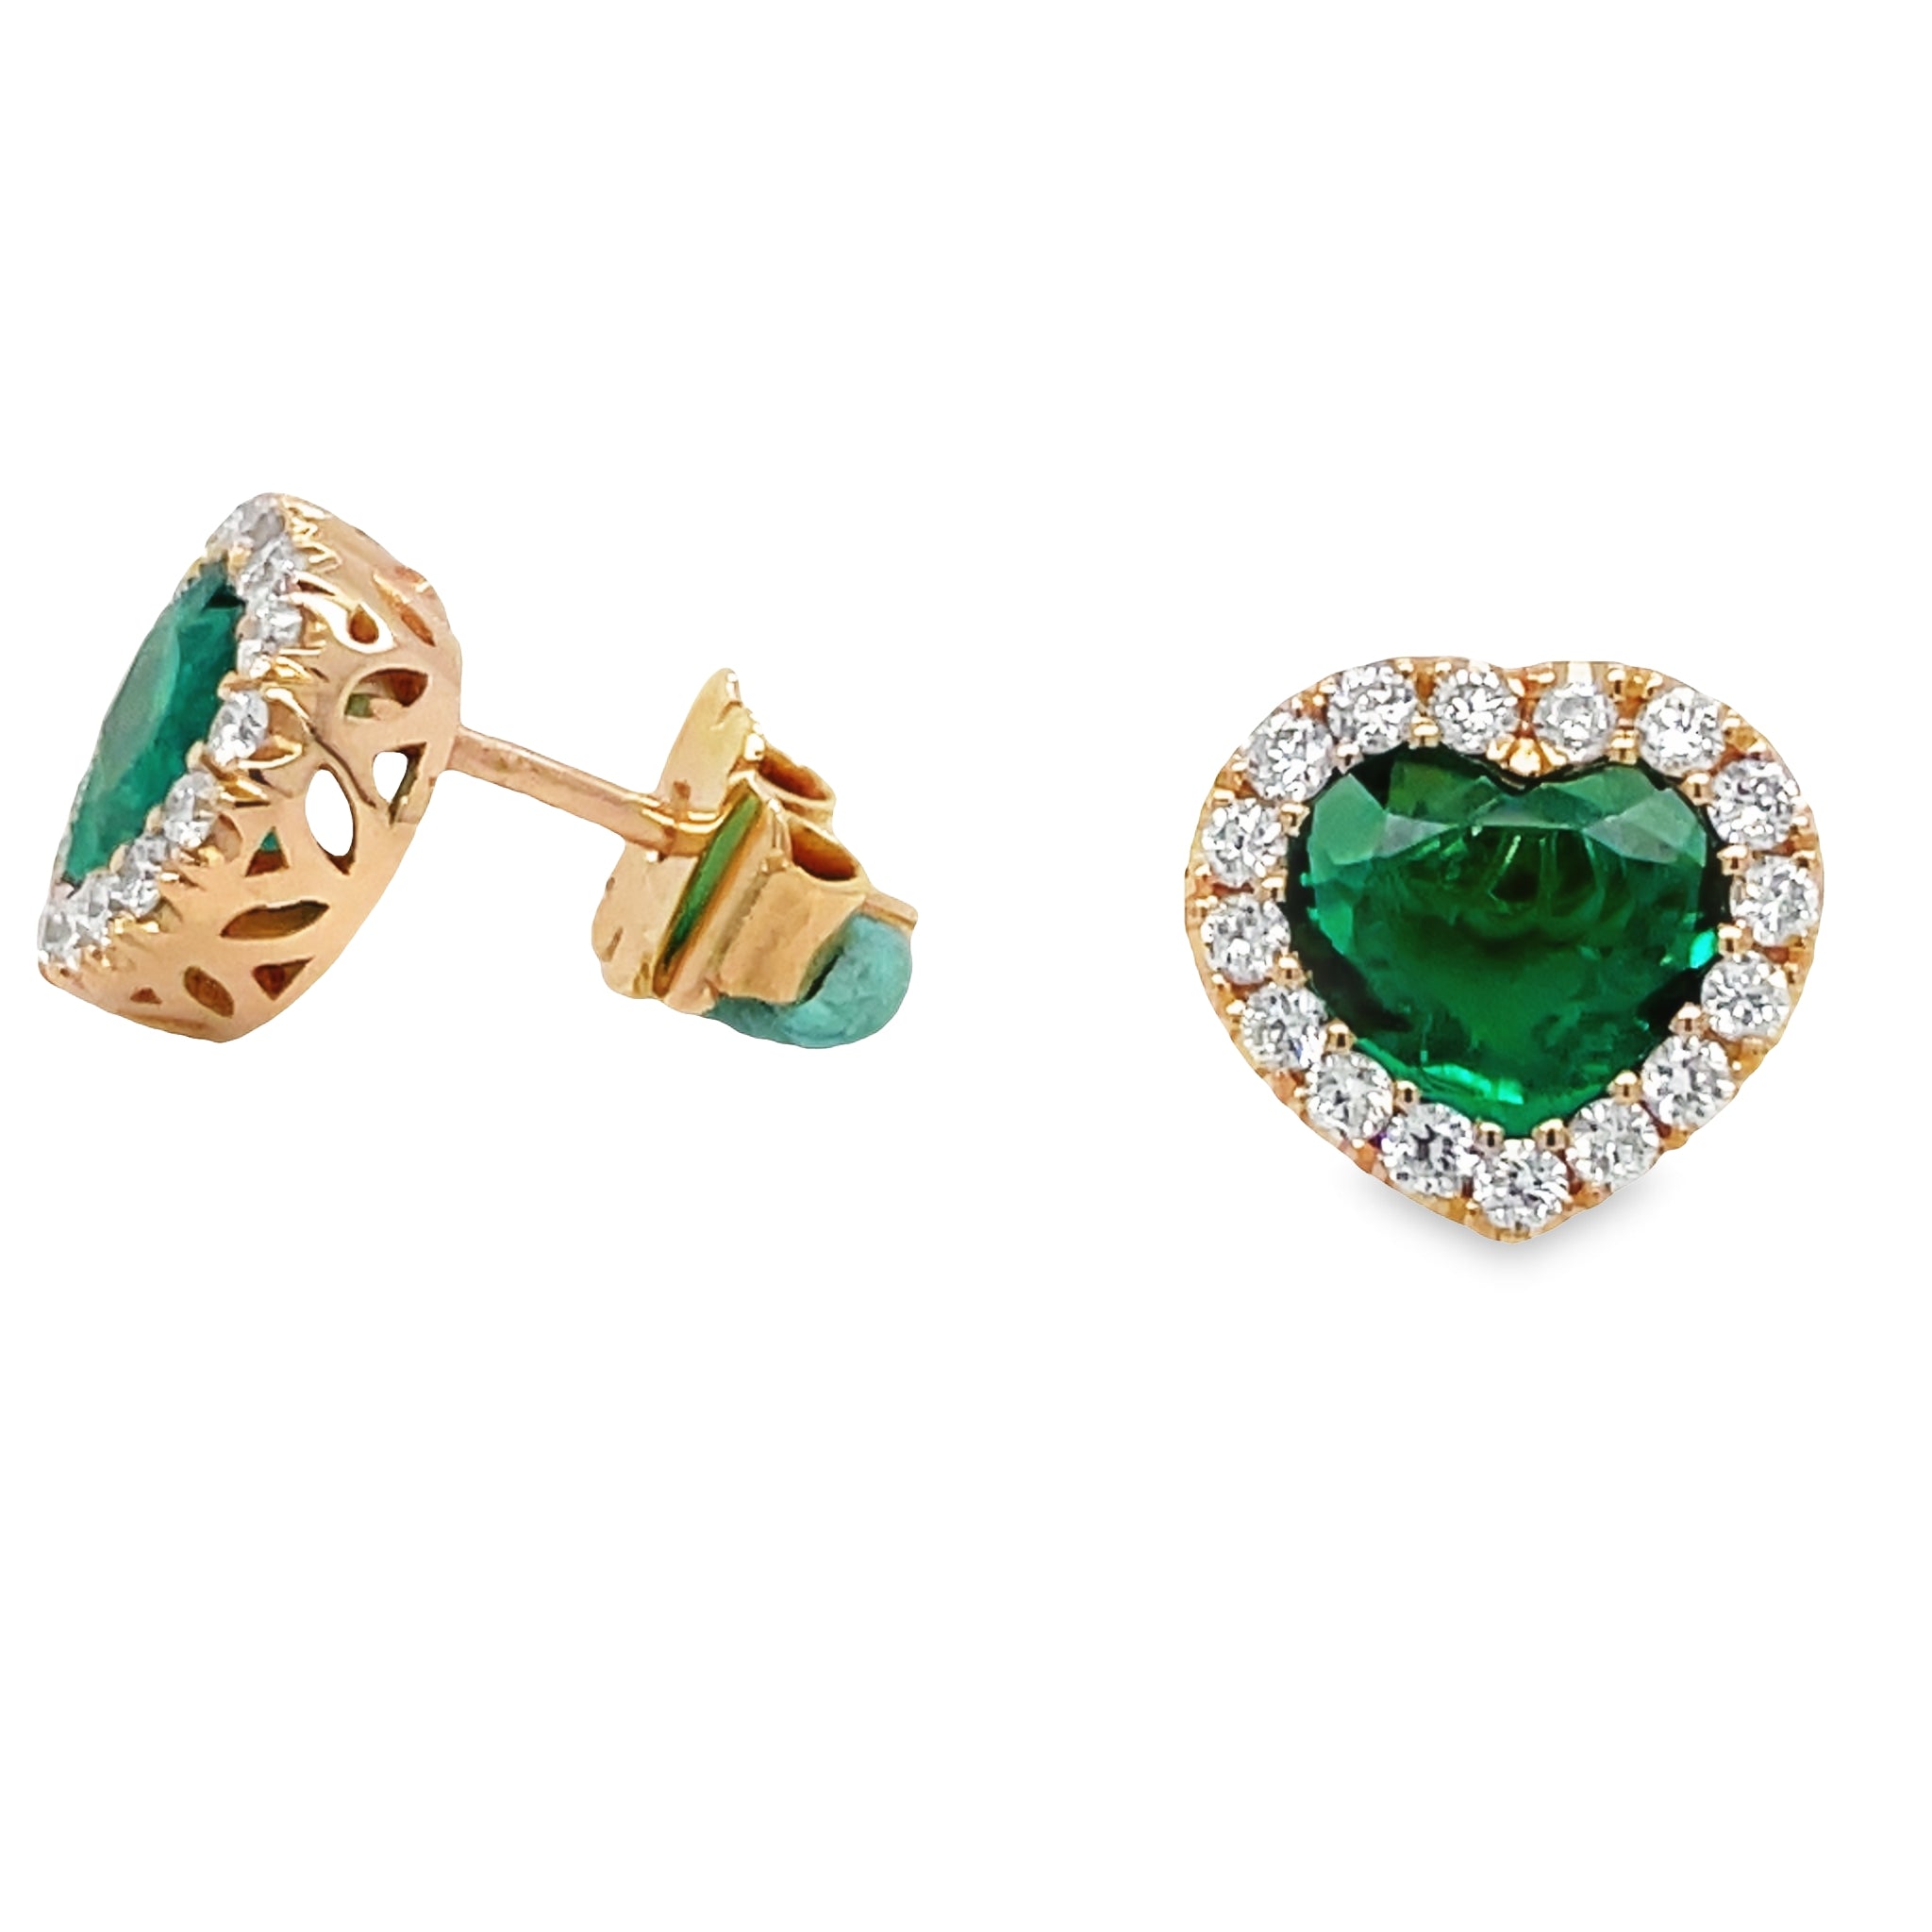 These Colombian Emerald and Diamond Stud Earrings feature a 2.00 cts heart shape cut emerald in 18k rose gold, complimented by round diamonds. This elegant earring set is perfect for those looking to add the perfect combination of sparkle and sophistication to their look.